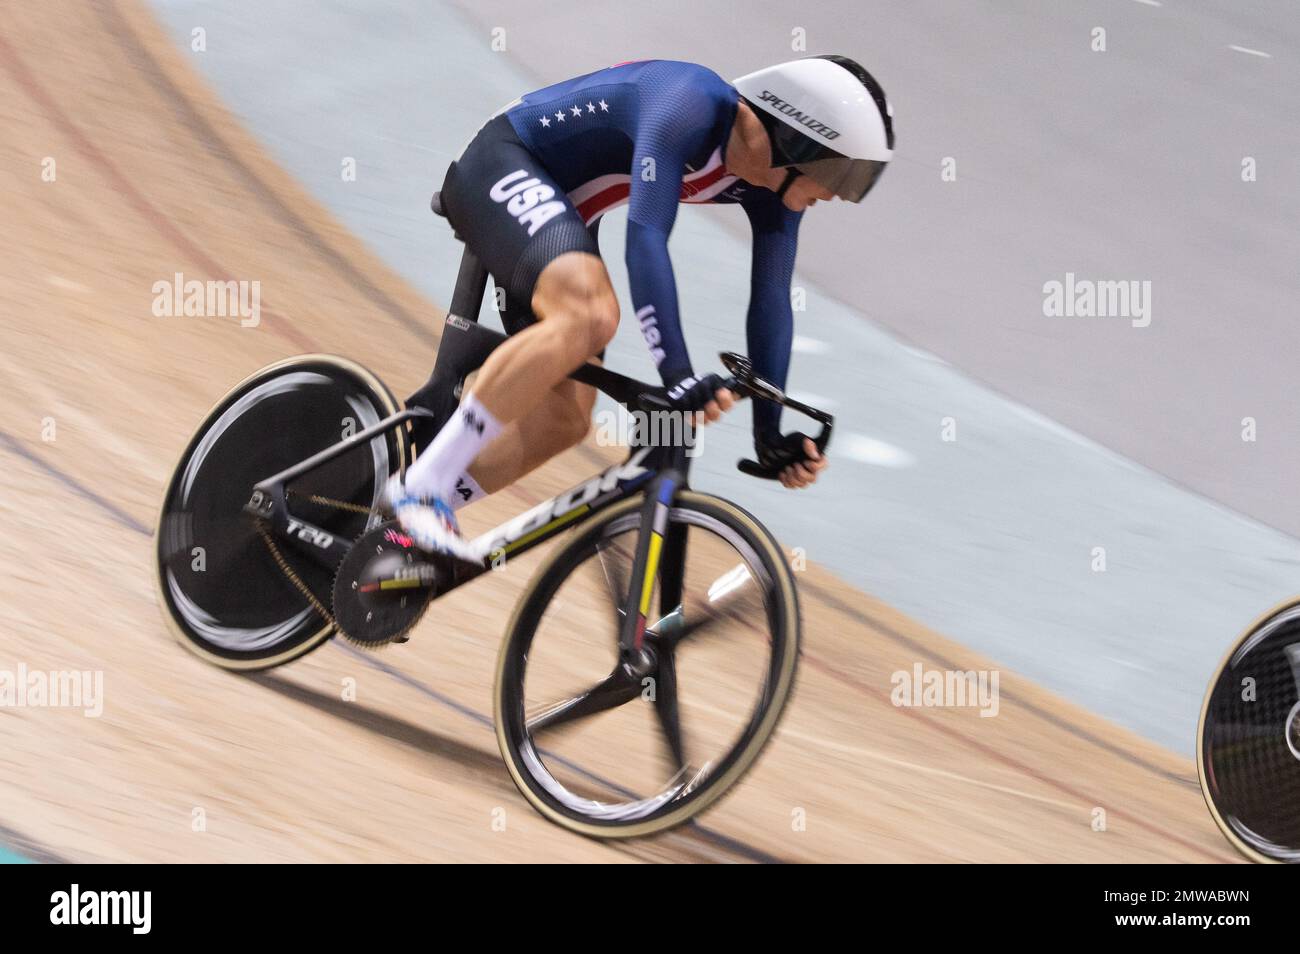 Gavin Hoover of Team USA during the men's points race, 2022 UCI Track Cycling World Championships. Stock Photo